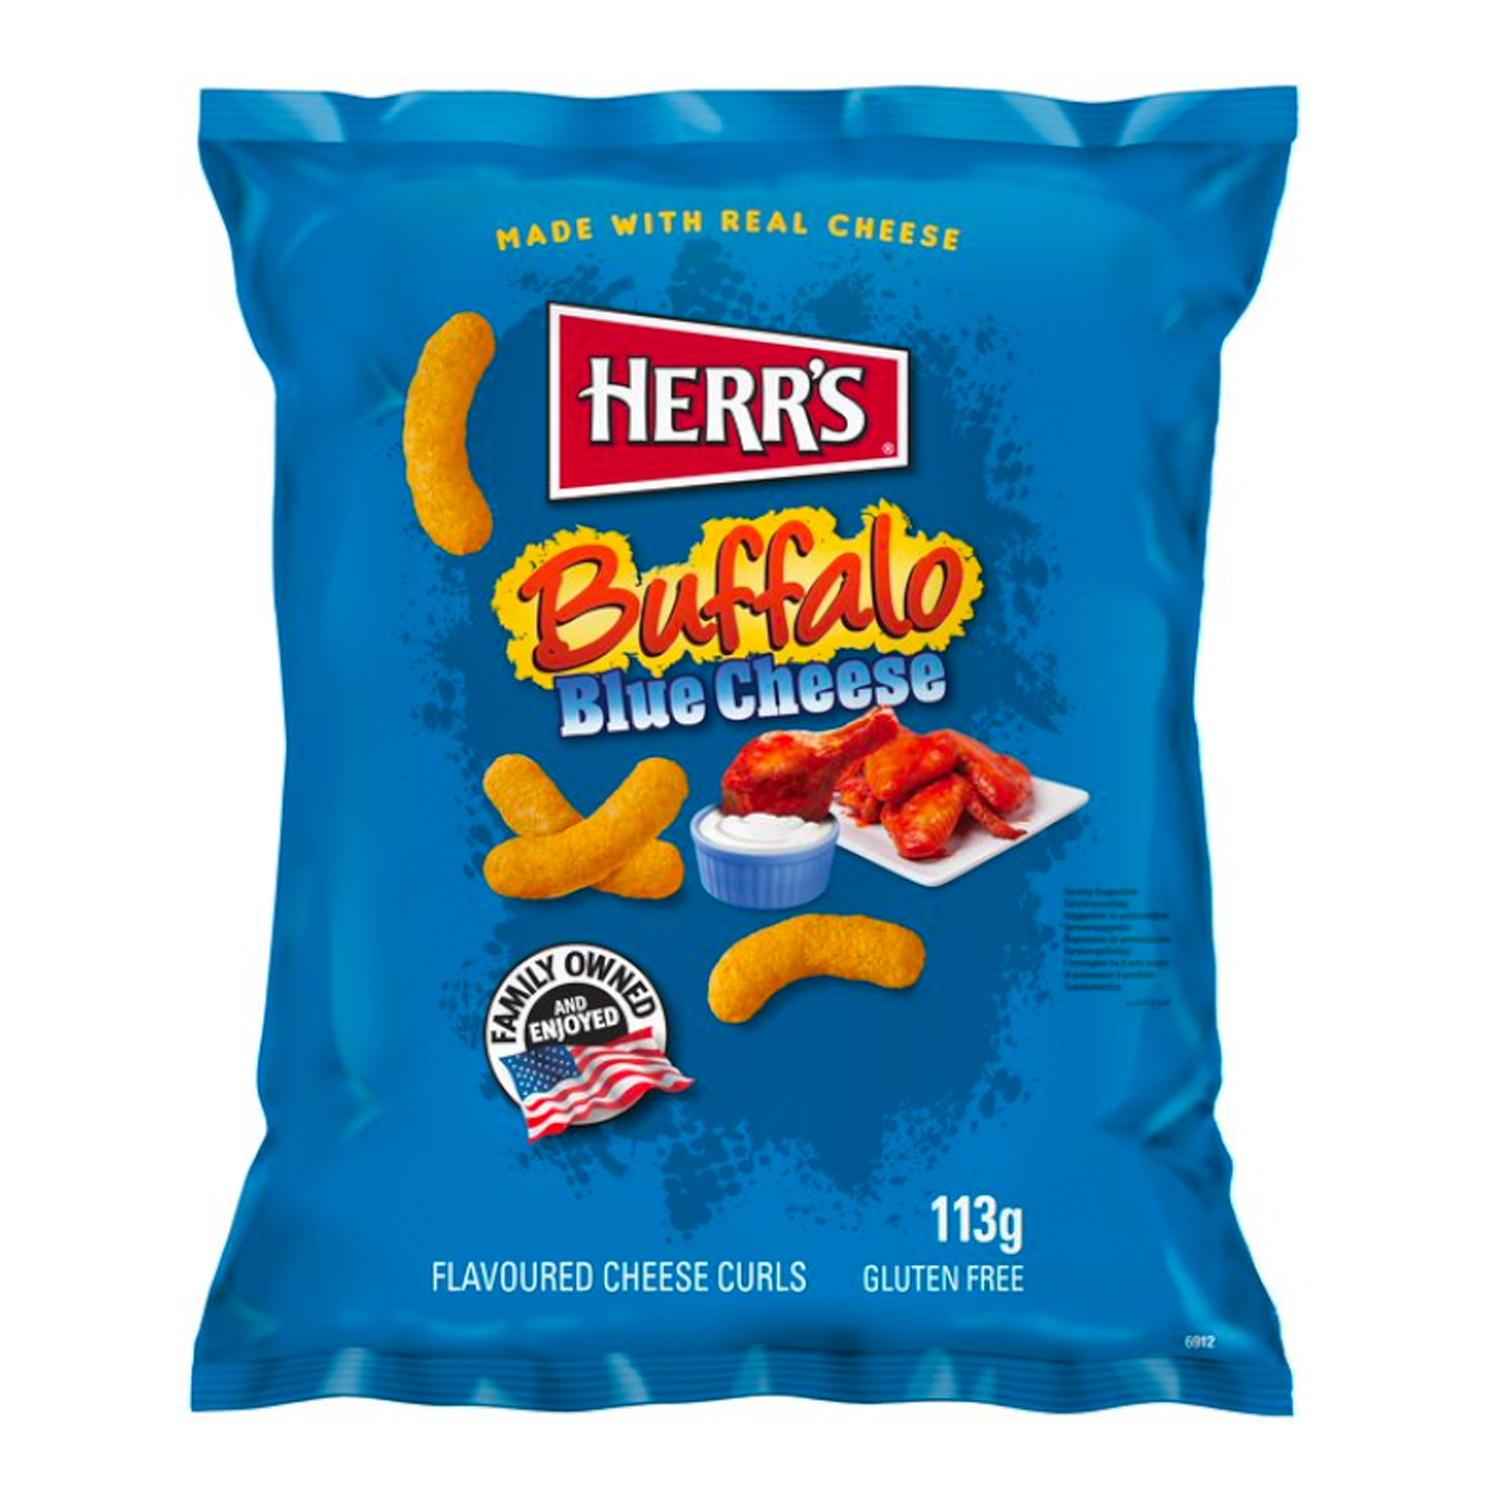 Herr's Spicy Buffalo Blue Cheese Flavoured Cheese Curls